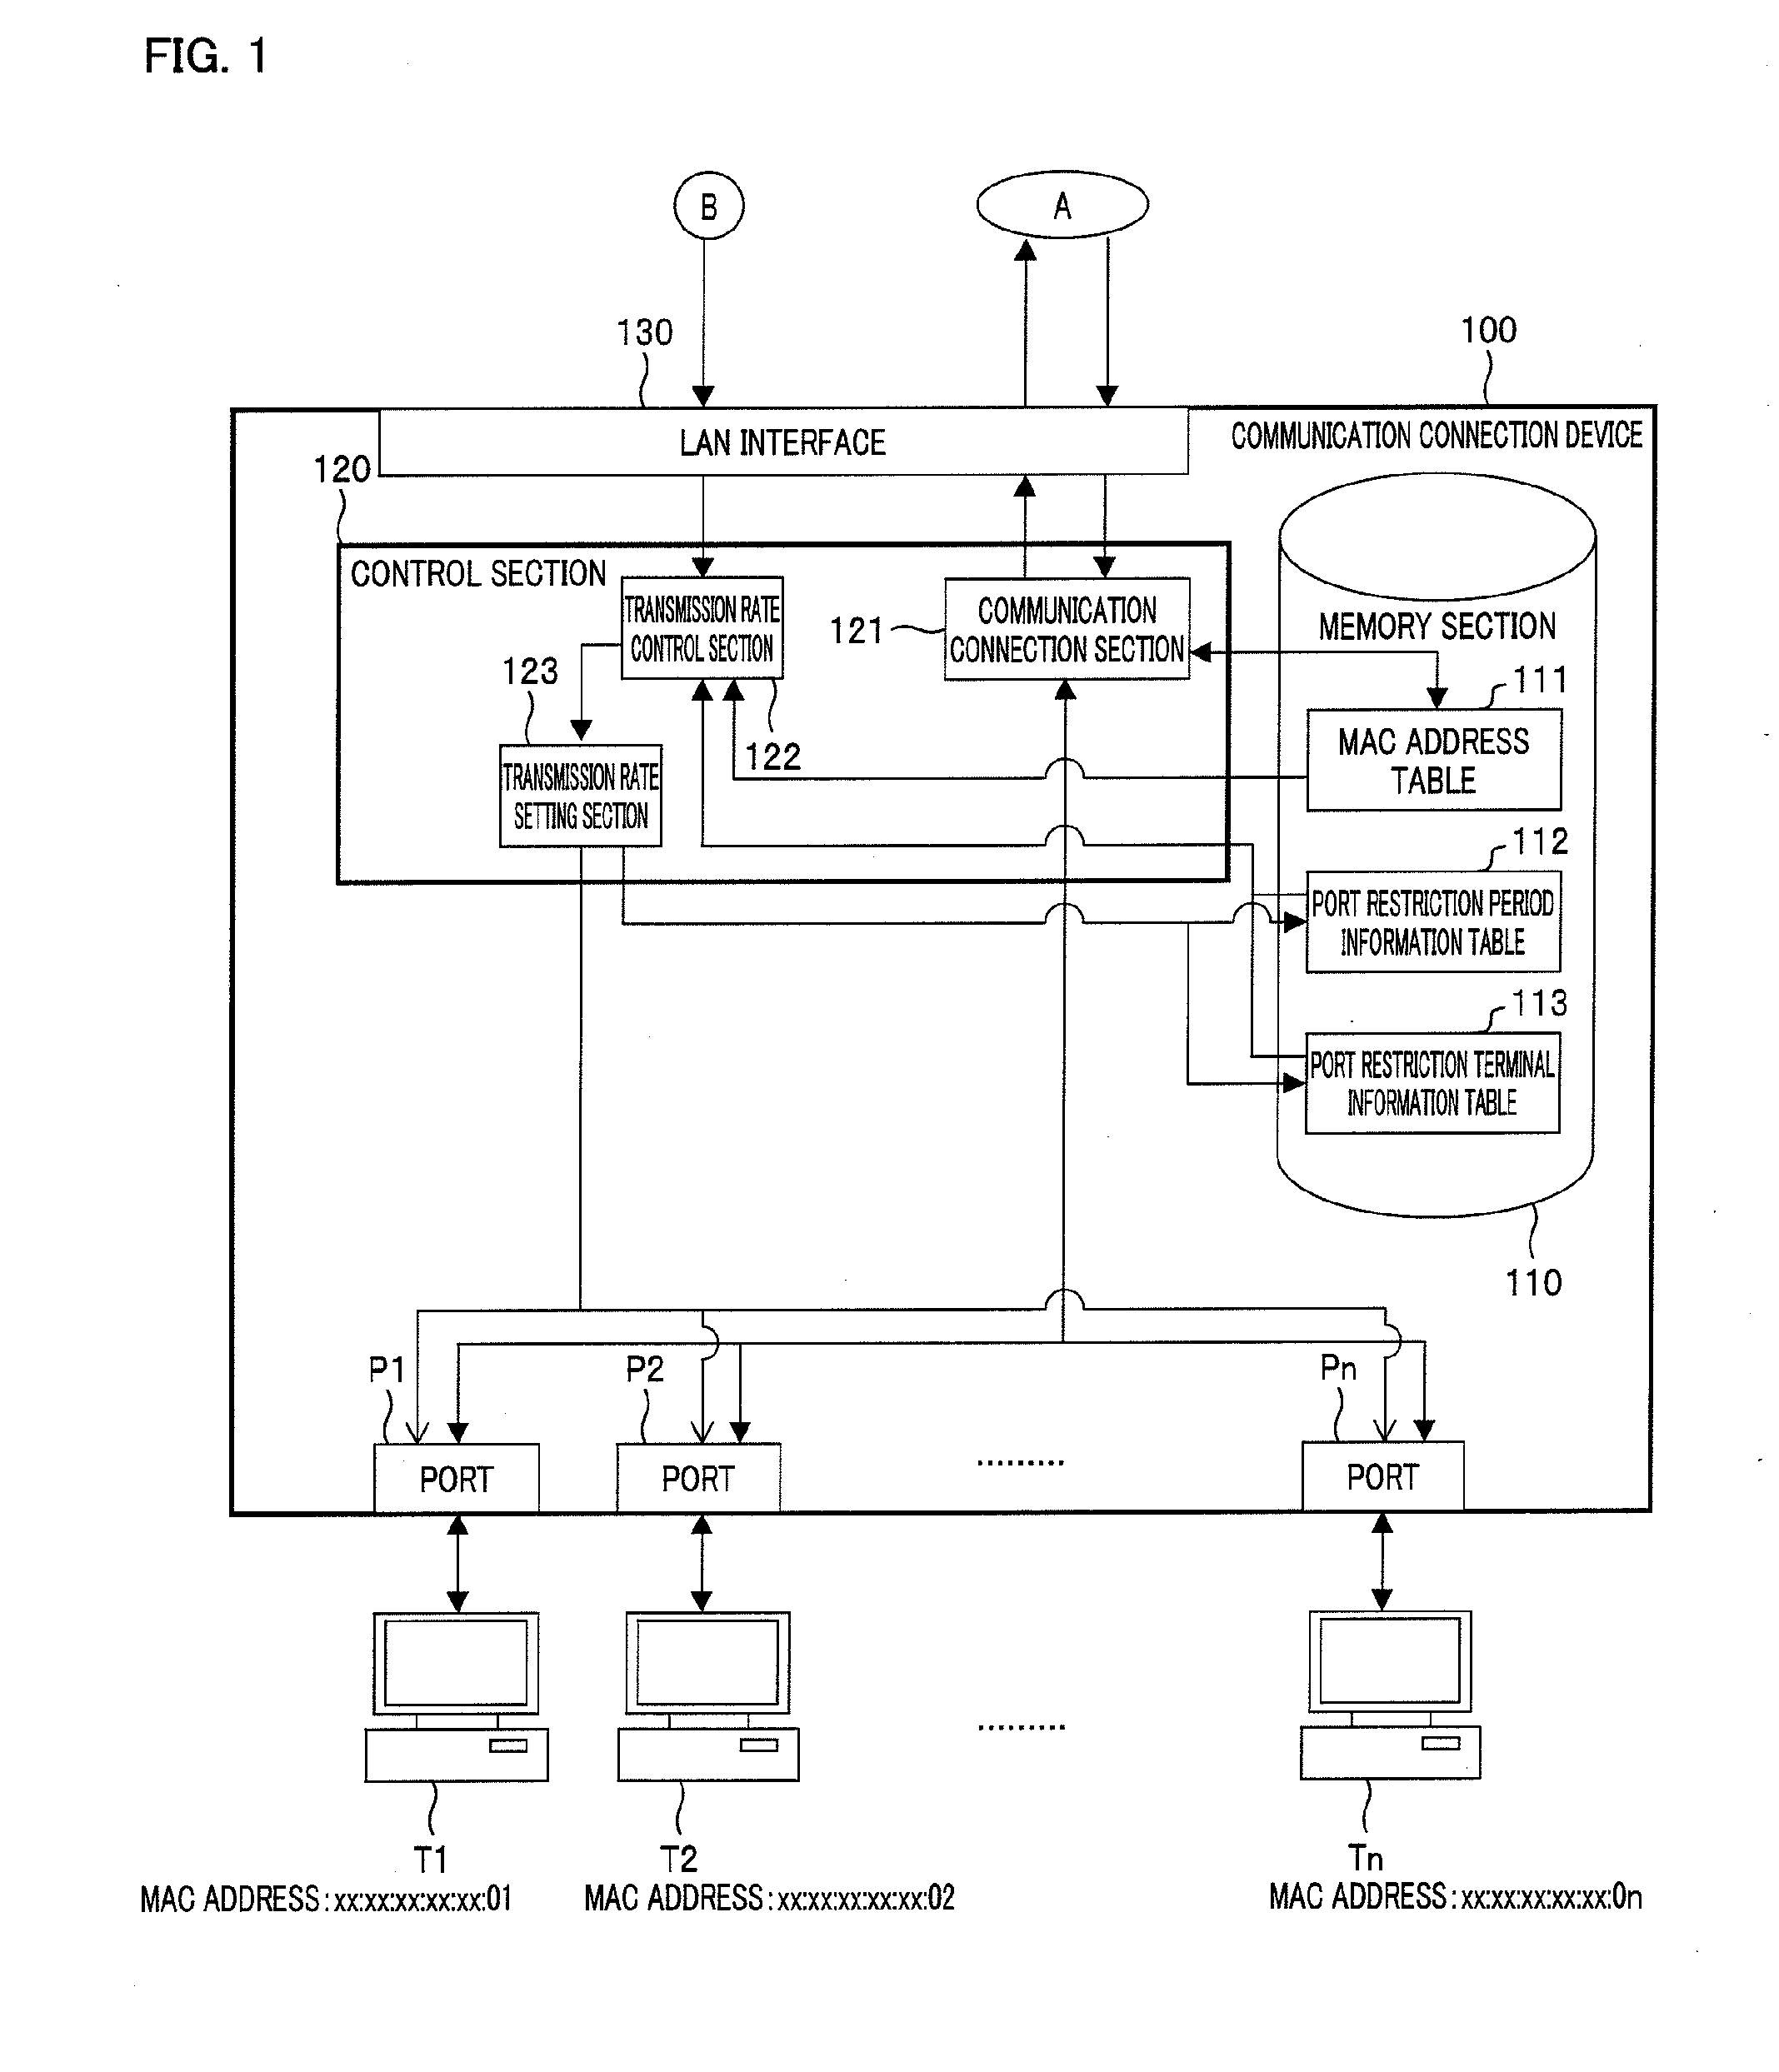 Transmission rate setting device, transmission rate setting device control method, content-filtering system, transmission rate setting device control program, and computer-readable recording medium